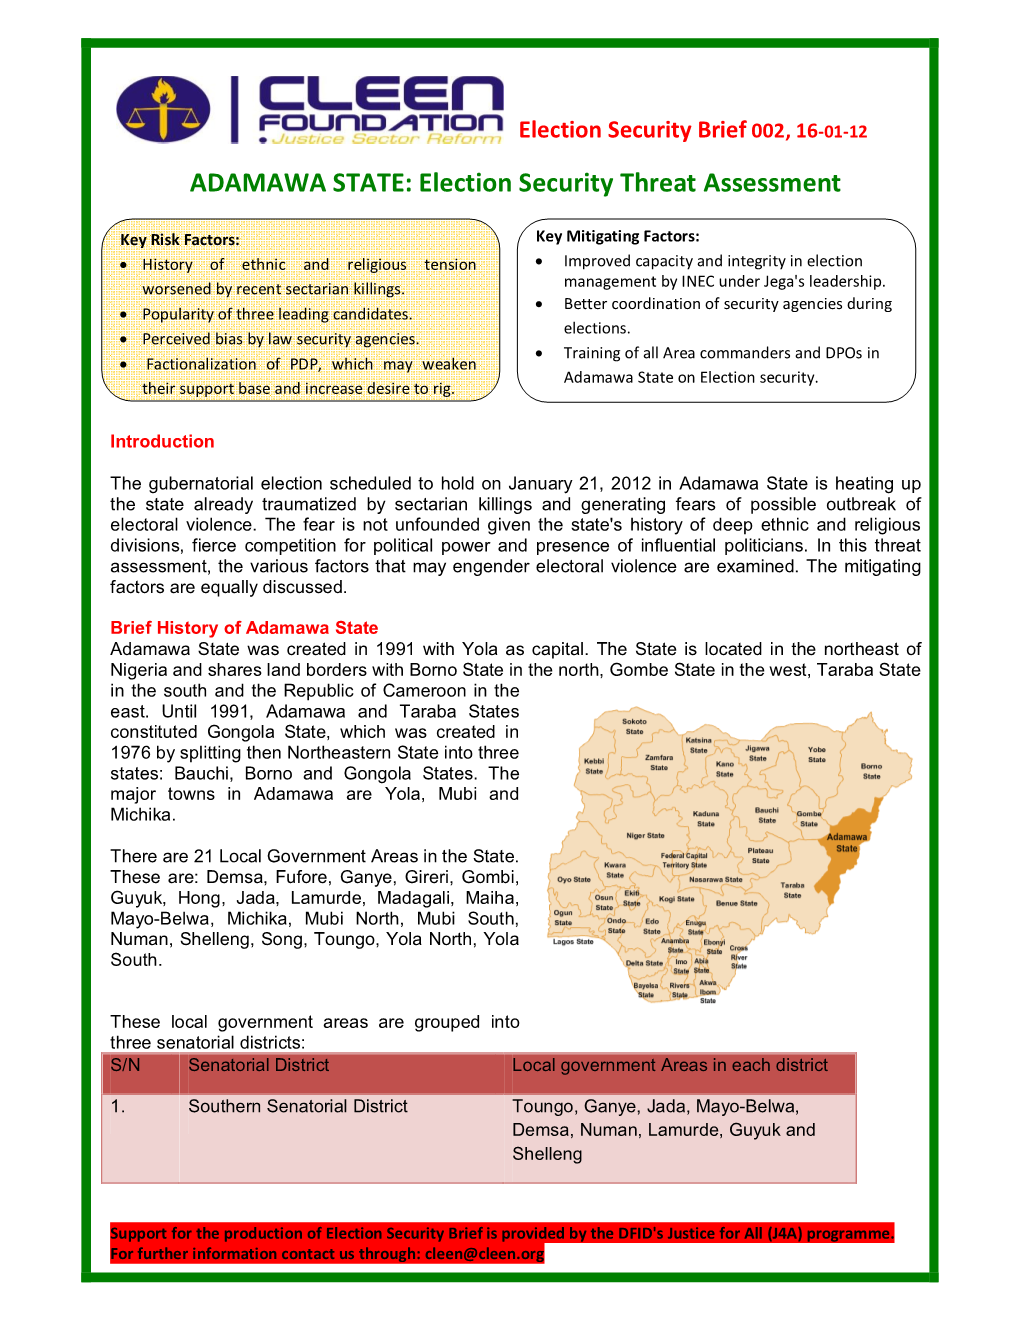 2011 Adamawa State: Election Security Threat Assessment Brief